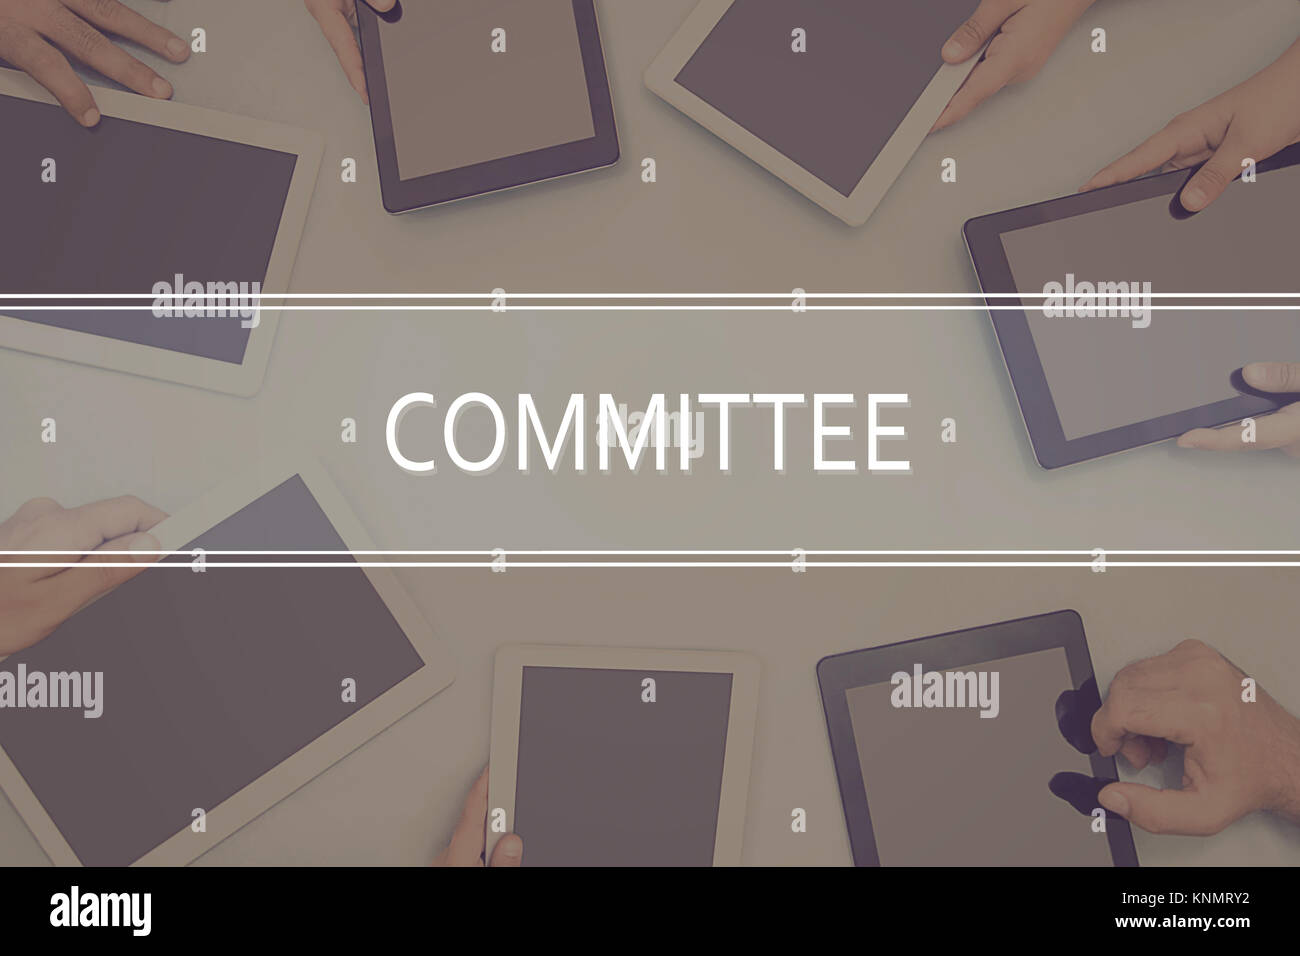 COMMITTEE CONCEPT Business Concept. Stock Photo